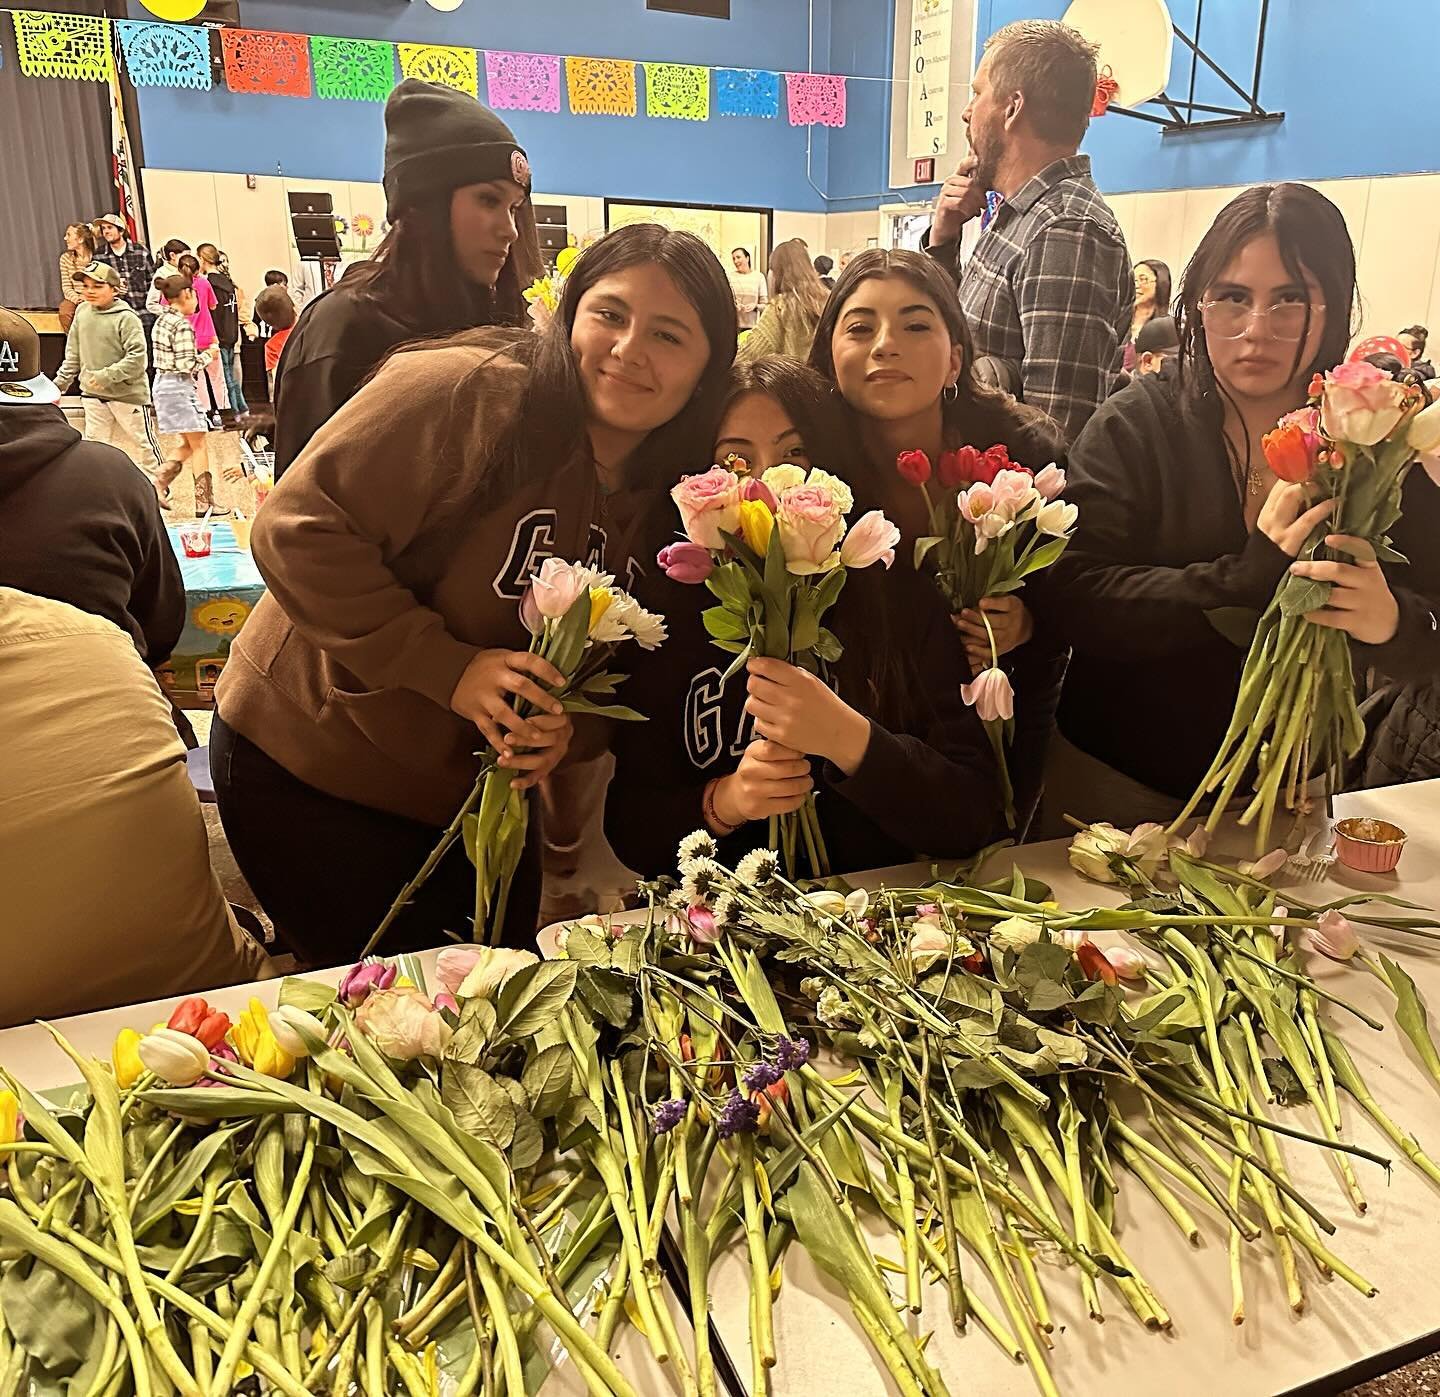 Smiles, laughs, and cheer as these kiddos created floral bouquets for their community at the Dia de Ninos! Thanks Bijou for hosting!
#petalkindness